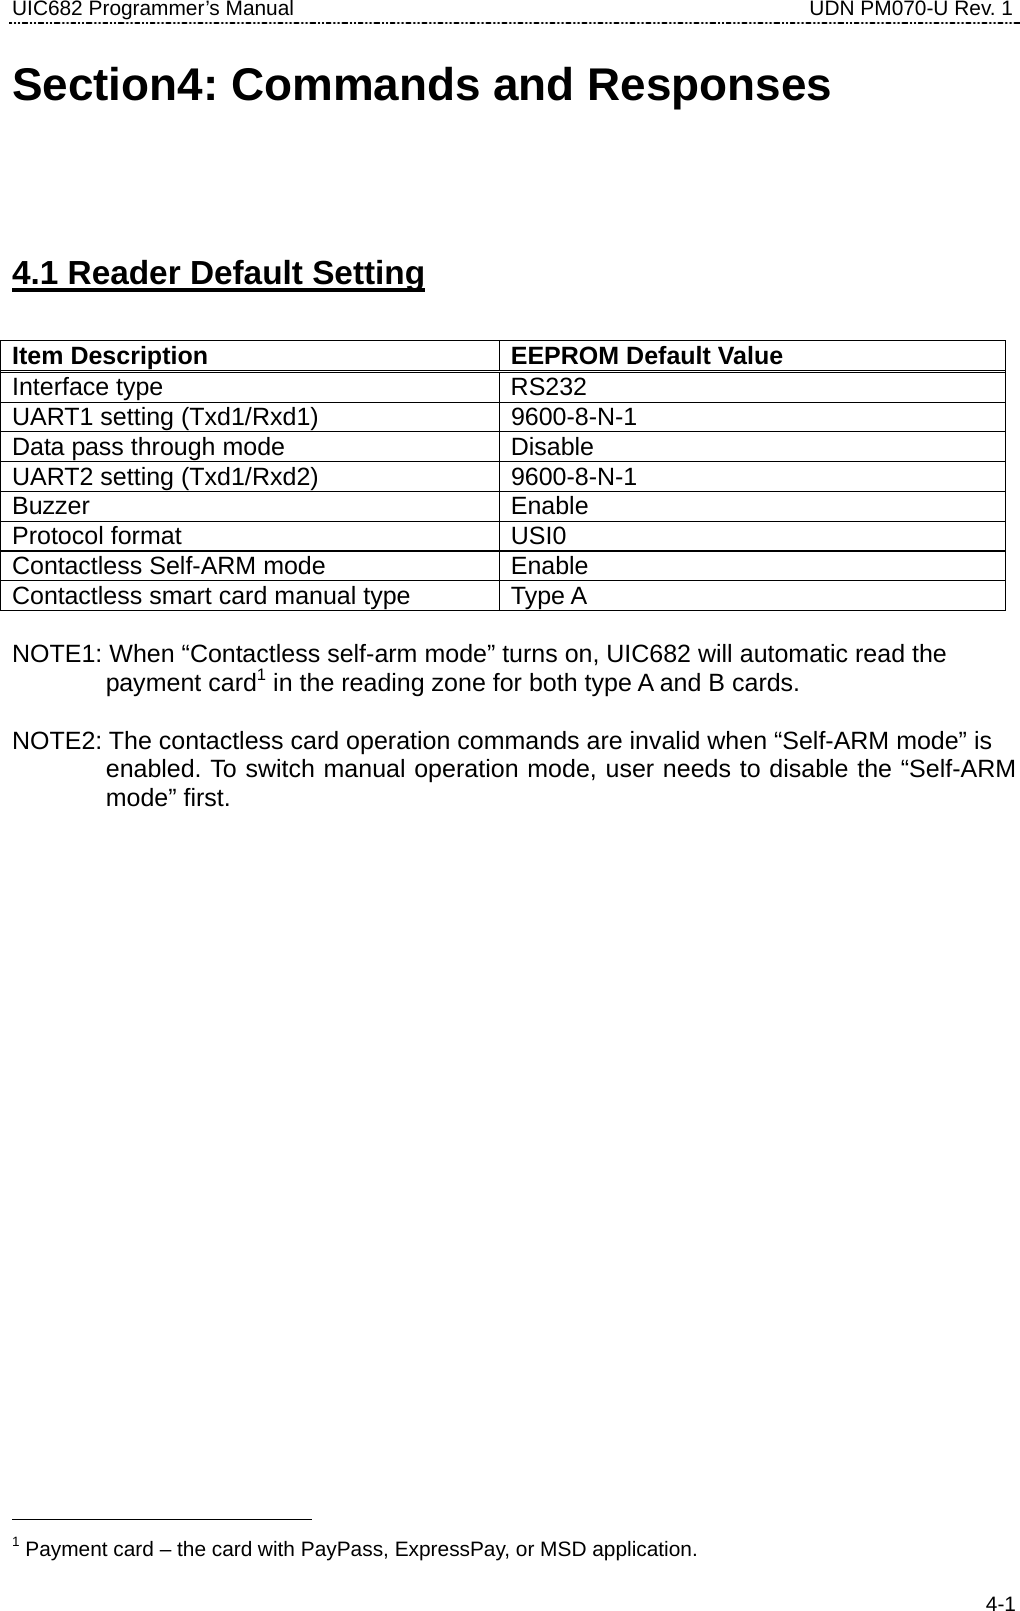 UIC682 Programmer’s Manual                                     UDN PM070-U Rev. 1 Section4: Commands and Responses 4.1 Reader Default Setting  Item Description  EEPROM Default Value Interface type  RS232 UART1 setting (Txd1/Rxd1)  9600-8-N-1 Data pass through mode  Disable UART2 setting (Txd1/Rxd2)  9600-8-N-1 Buzzer Enable Protocol format  USI0 Contactless Self-ARM mode  Enable Contactless smart card manual type  Type A  NOTE1: When “Contactless self-arm mode” turns on, UIC682 will automatic read the   payment card1 in the reading zone for both type A and B cards.  NOTE2: The contactless card operation commands are invalid when “Self-ARM mode” is   enabled. To switch manual operation mode, user needs to disable the “Self-ARM mode” first.                                               1 Payment card – the card with PayPass, ExpressPay, or MSD application.  4-1